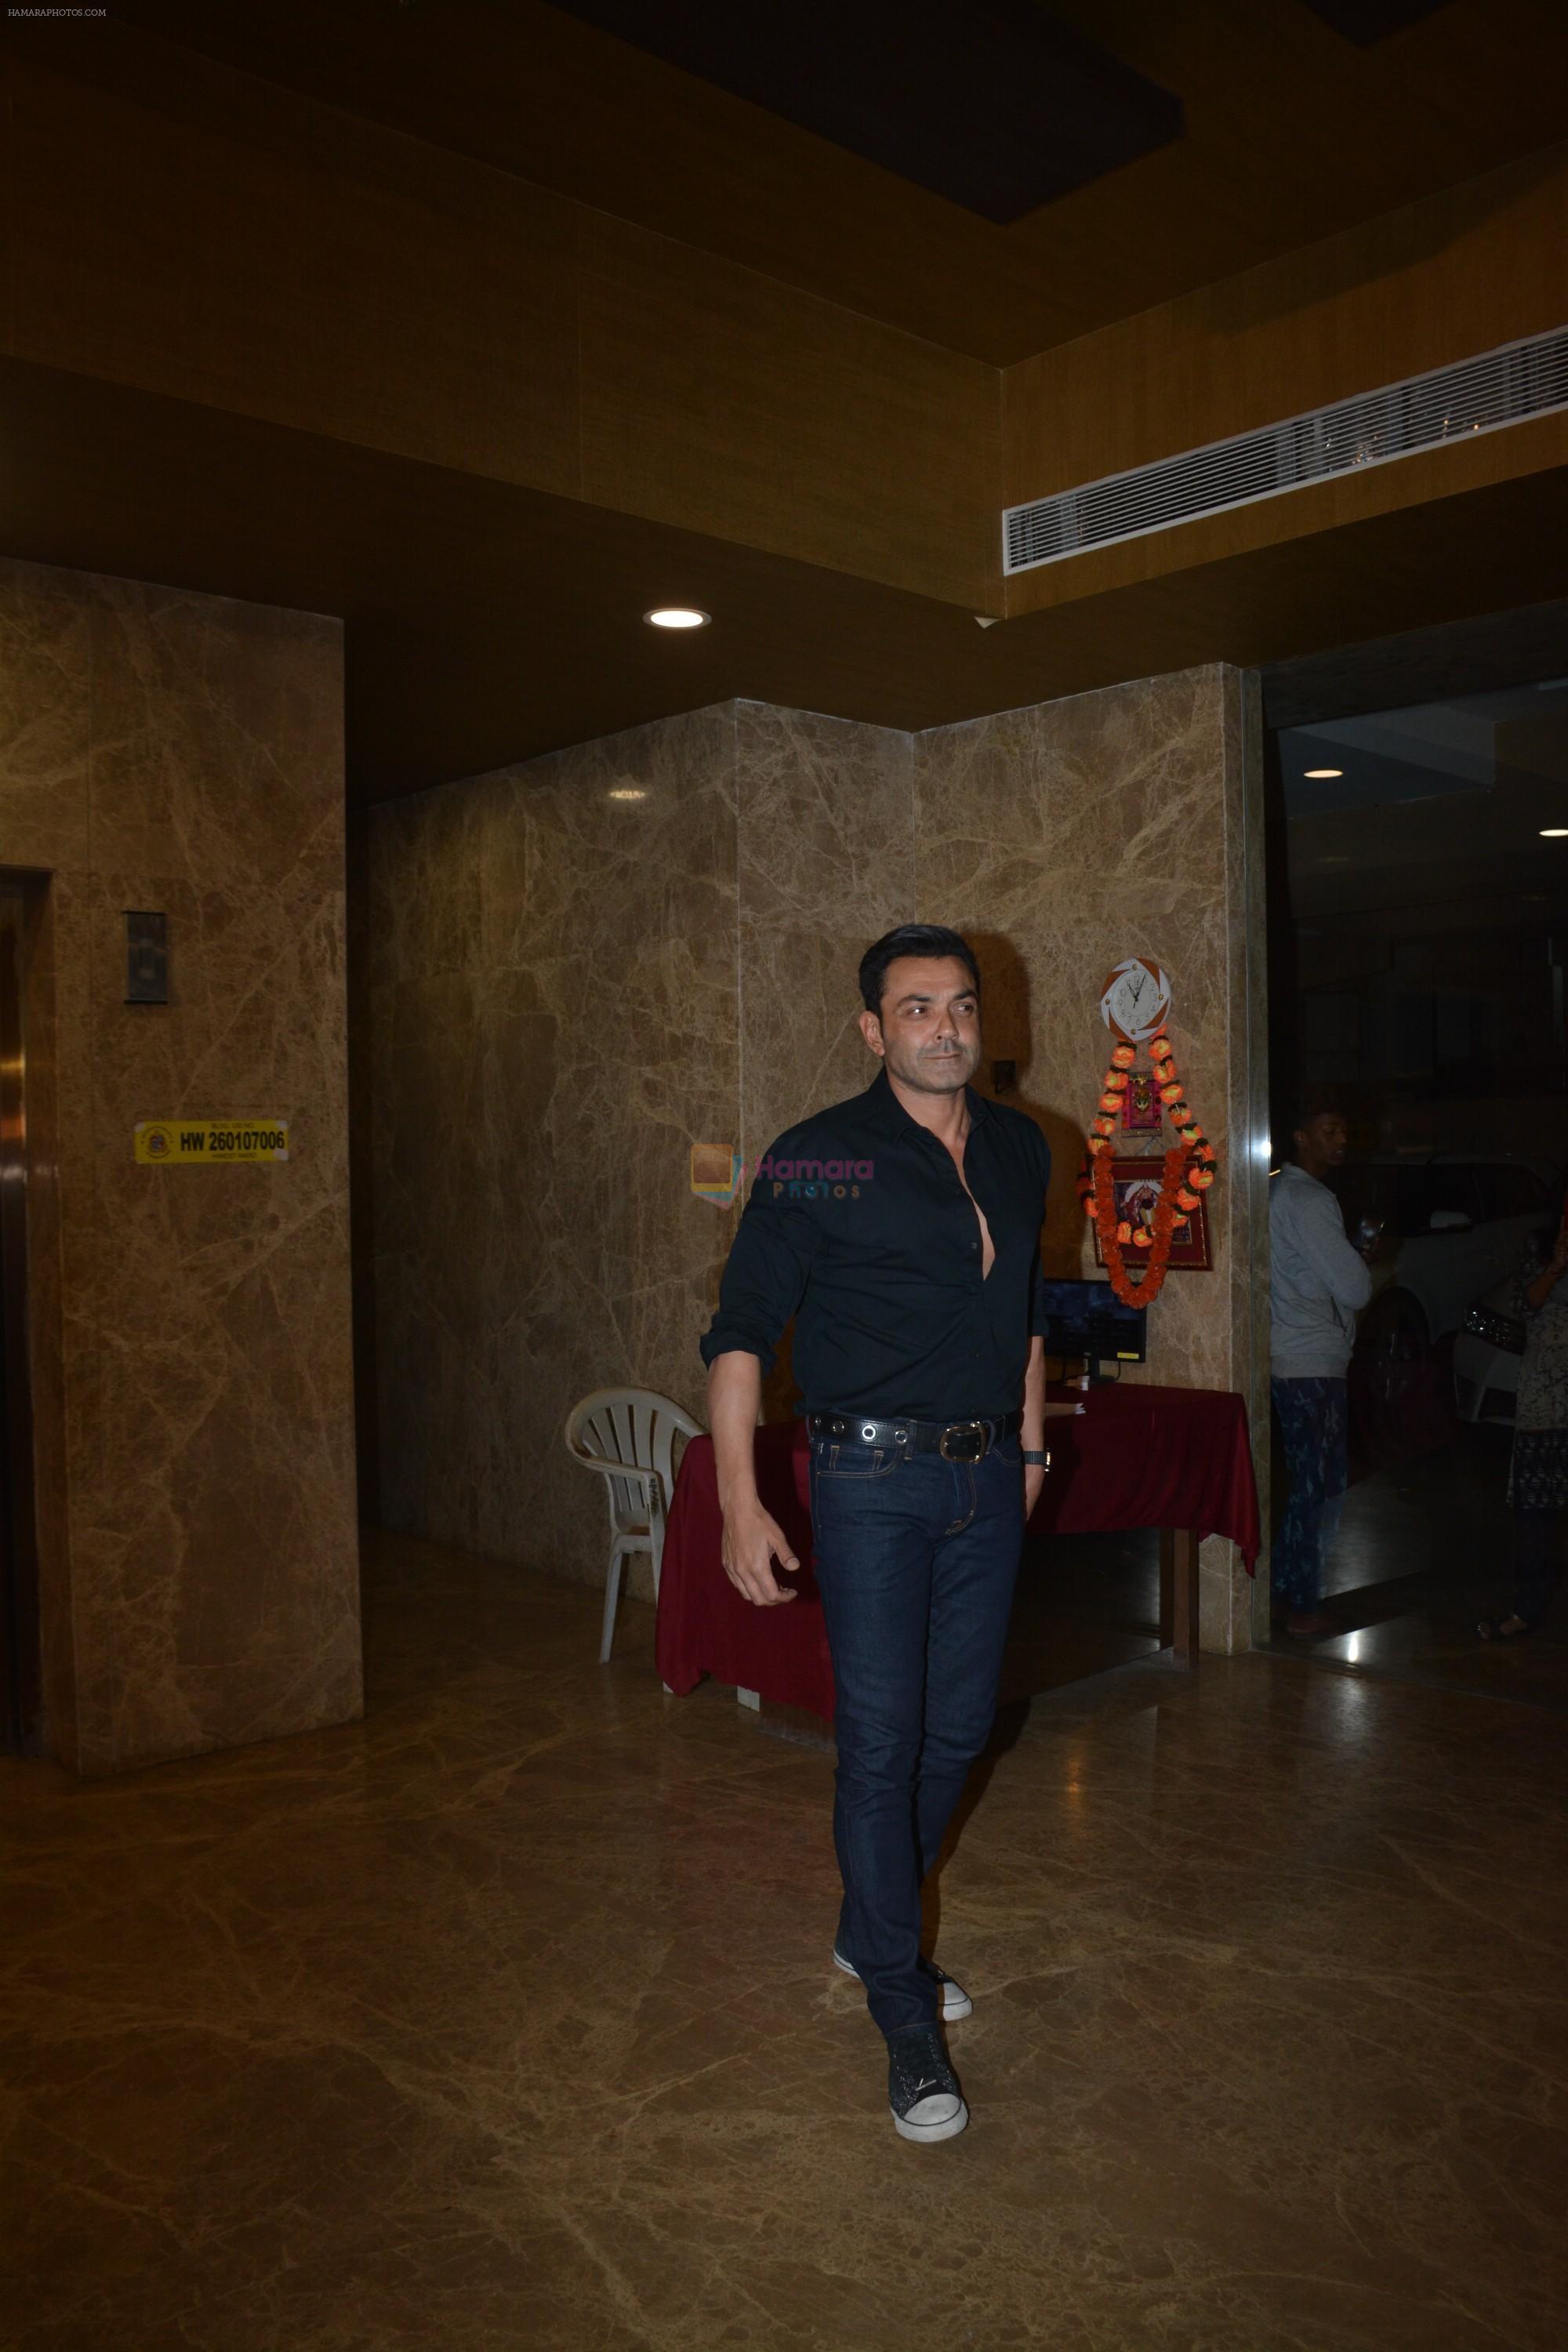 Bobby Deol at Ramesh Taurani's birthday party at his house in khar on 17th Jan 2019